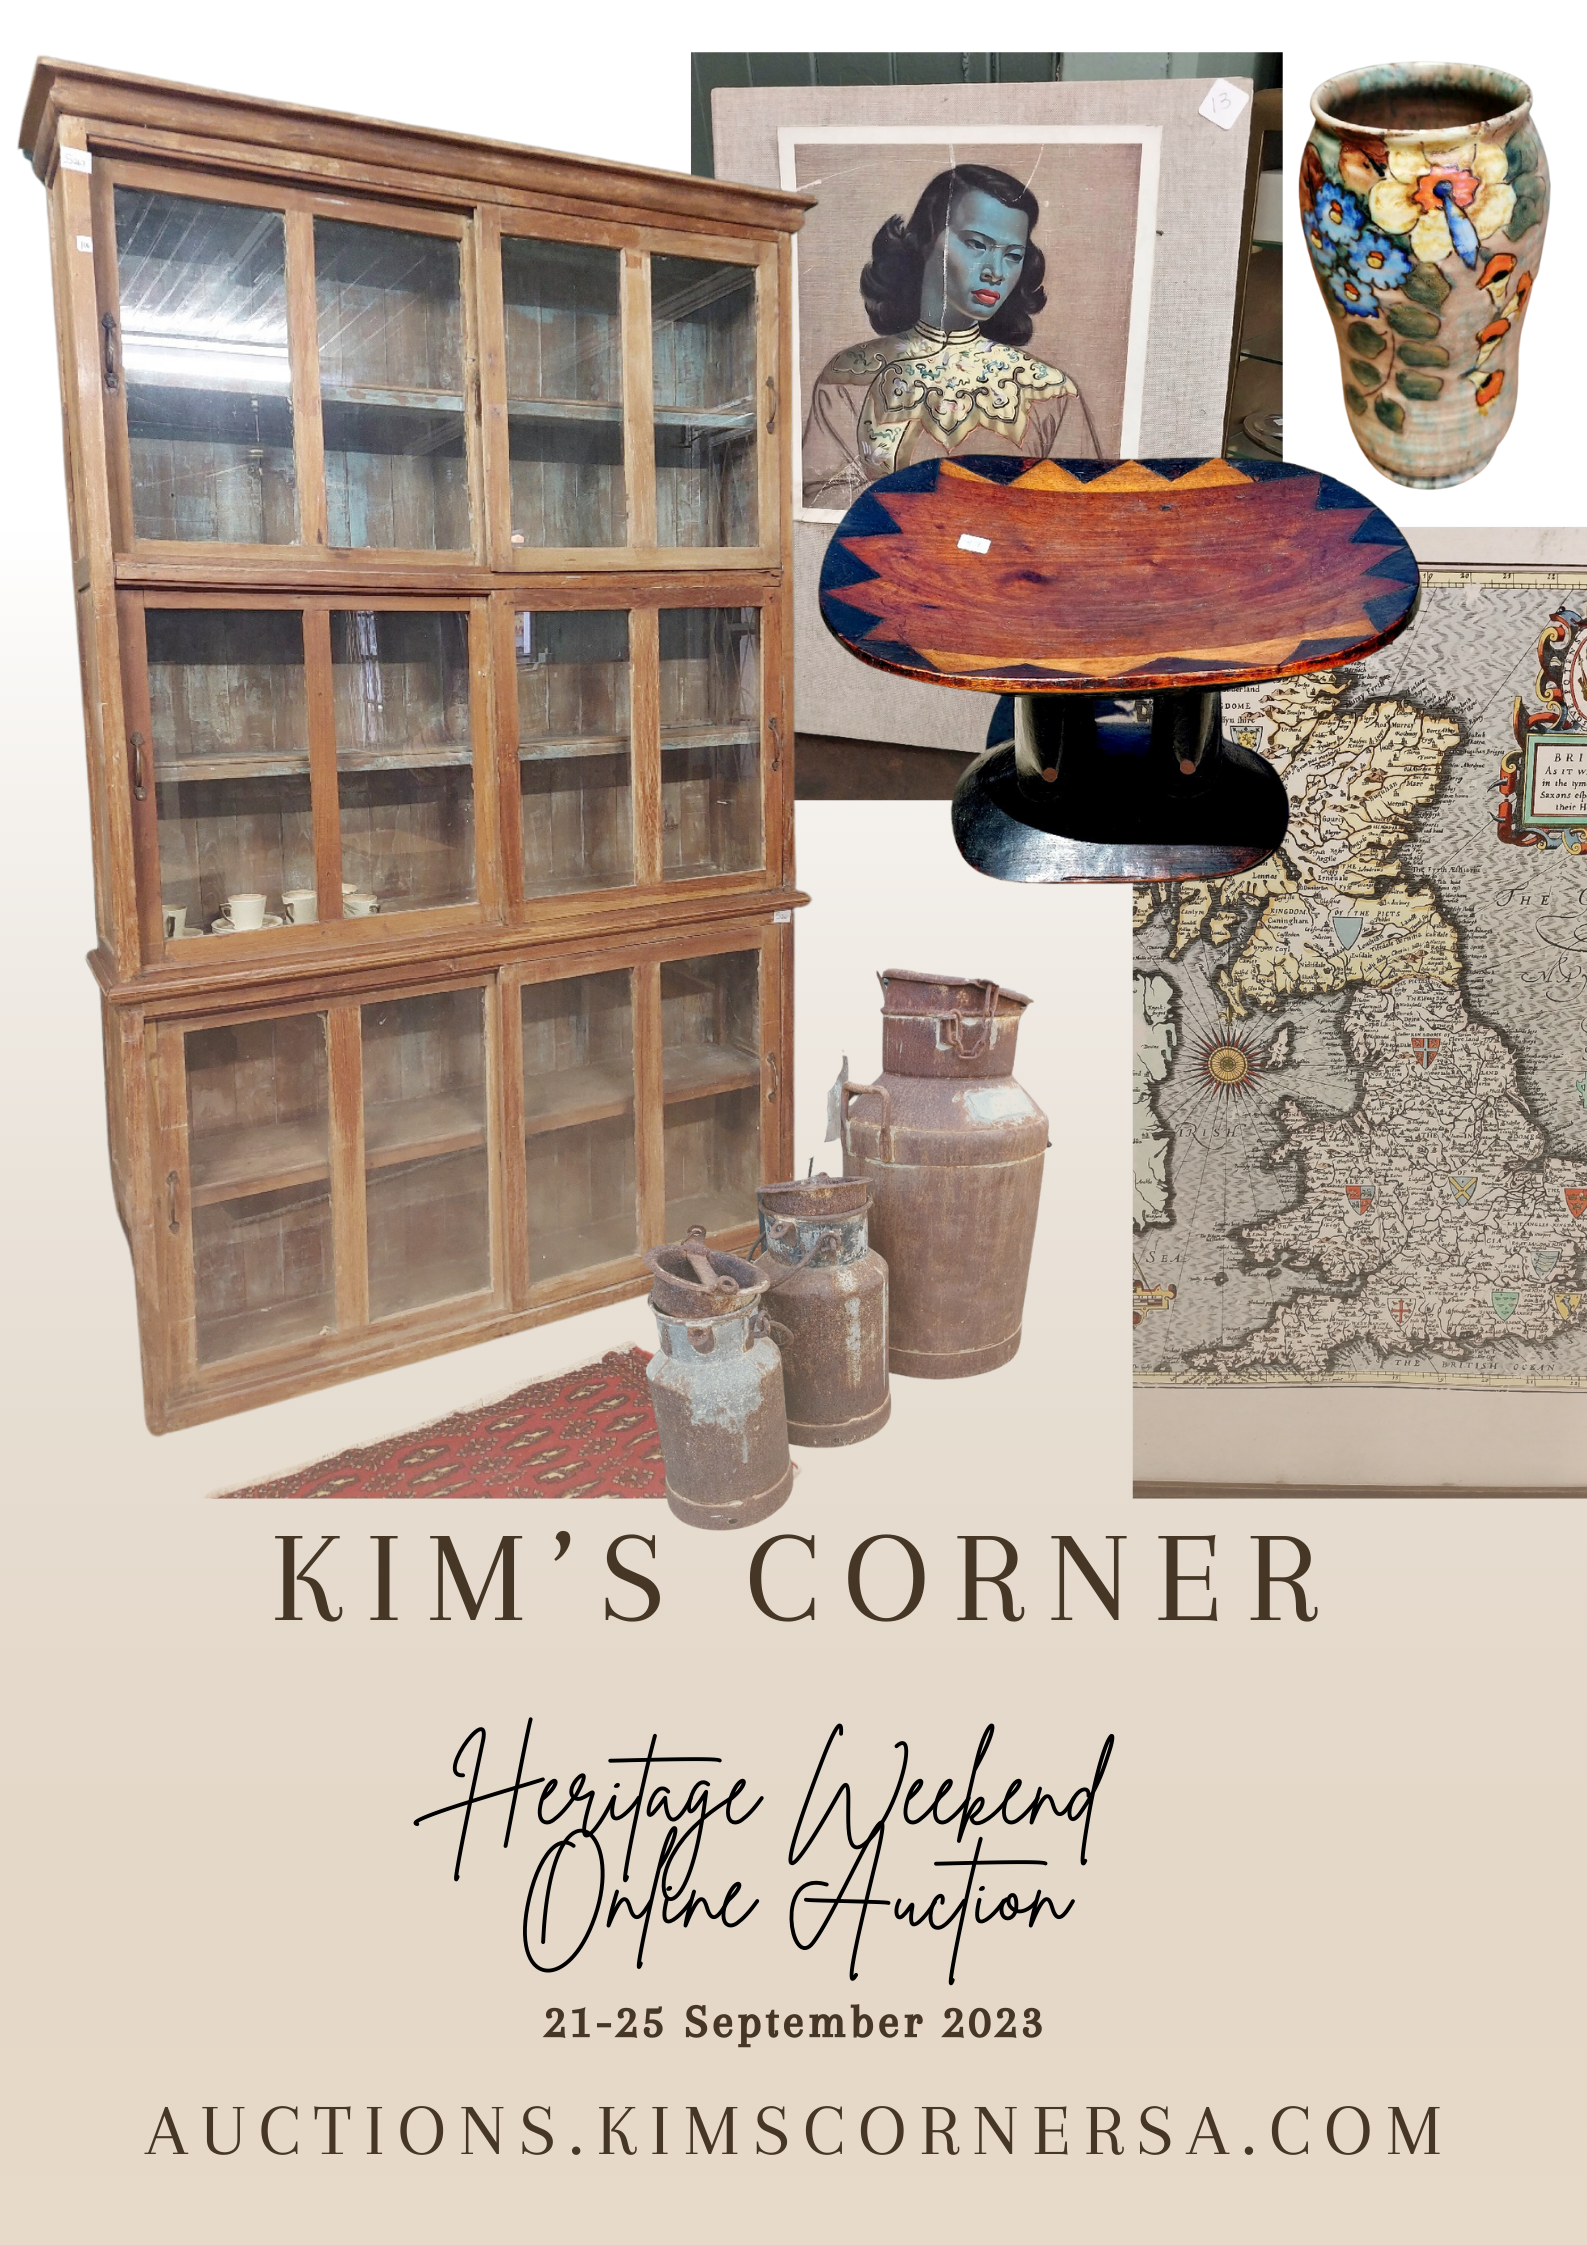 Load video: Kim&#39;s Corner Heritage Weekend Online Auction ends Monday 25th September from 12pm onwards.